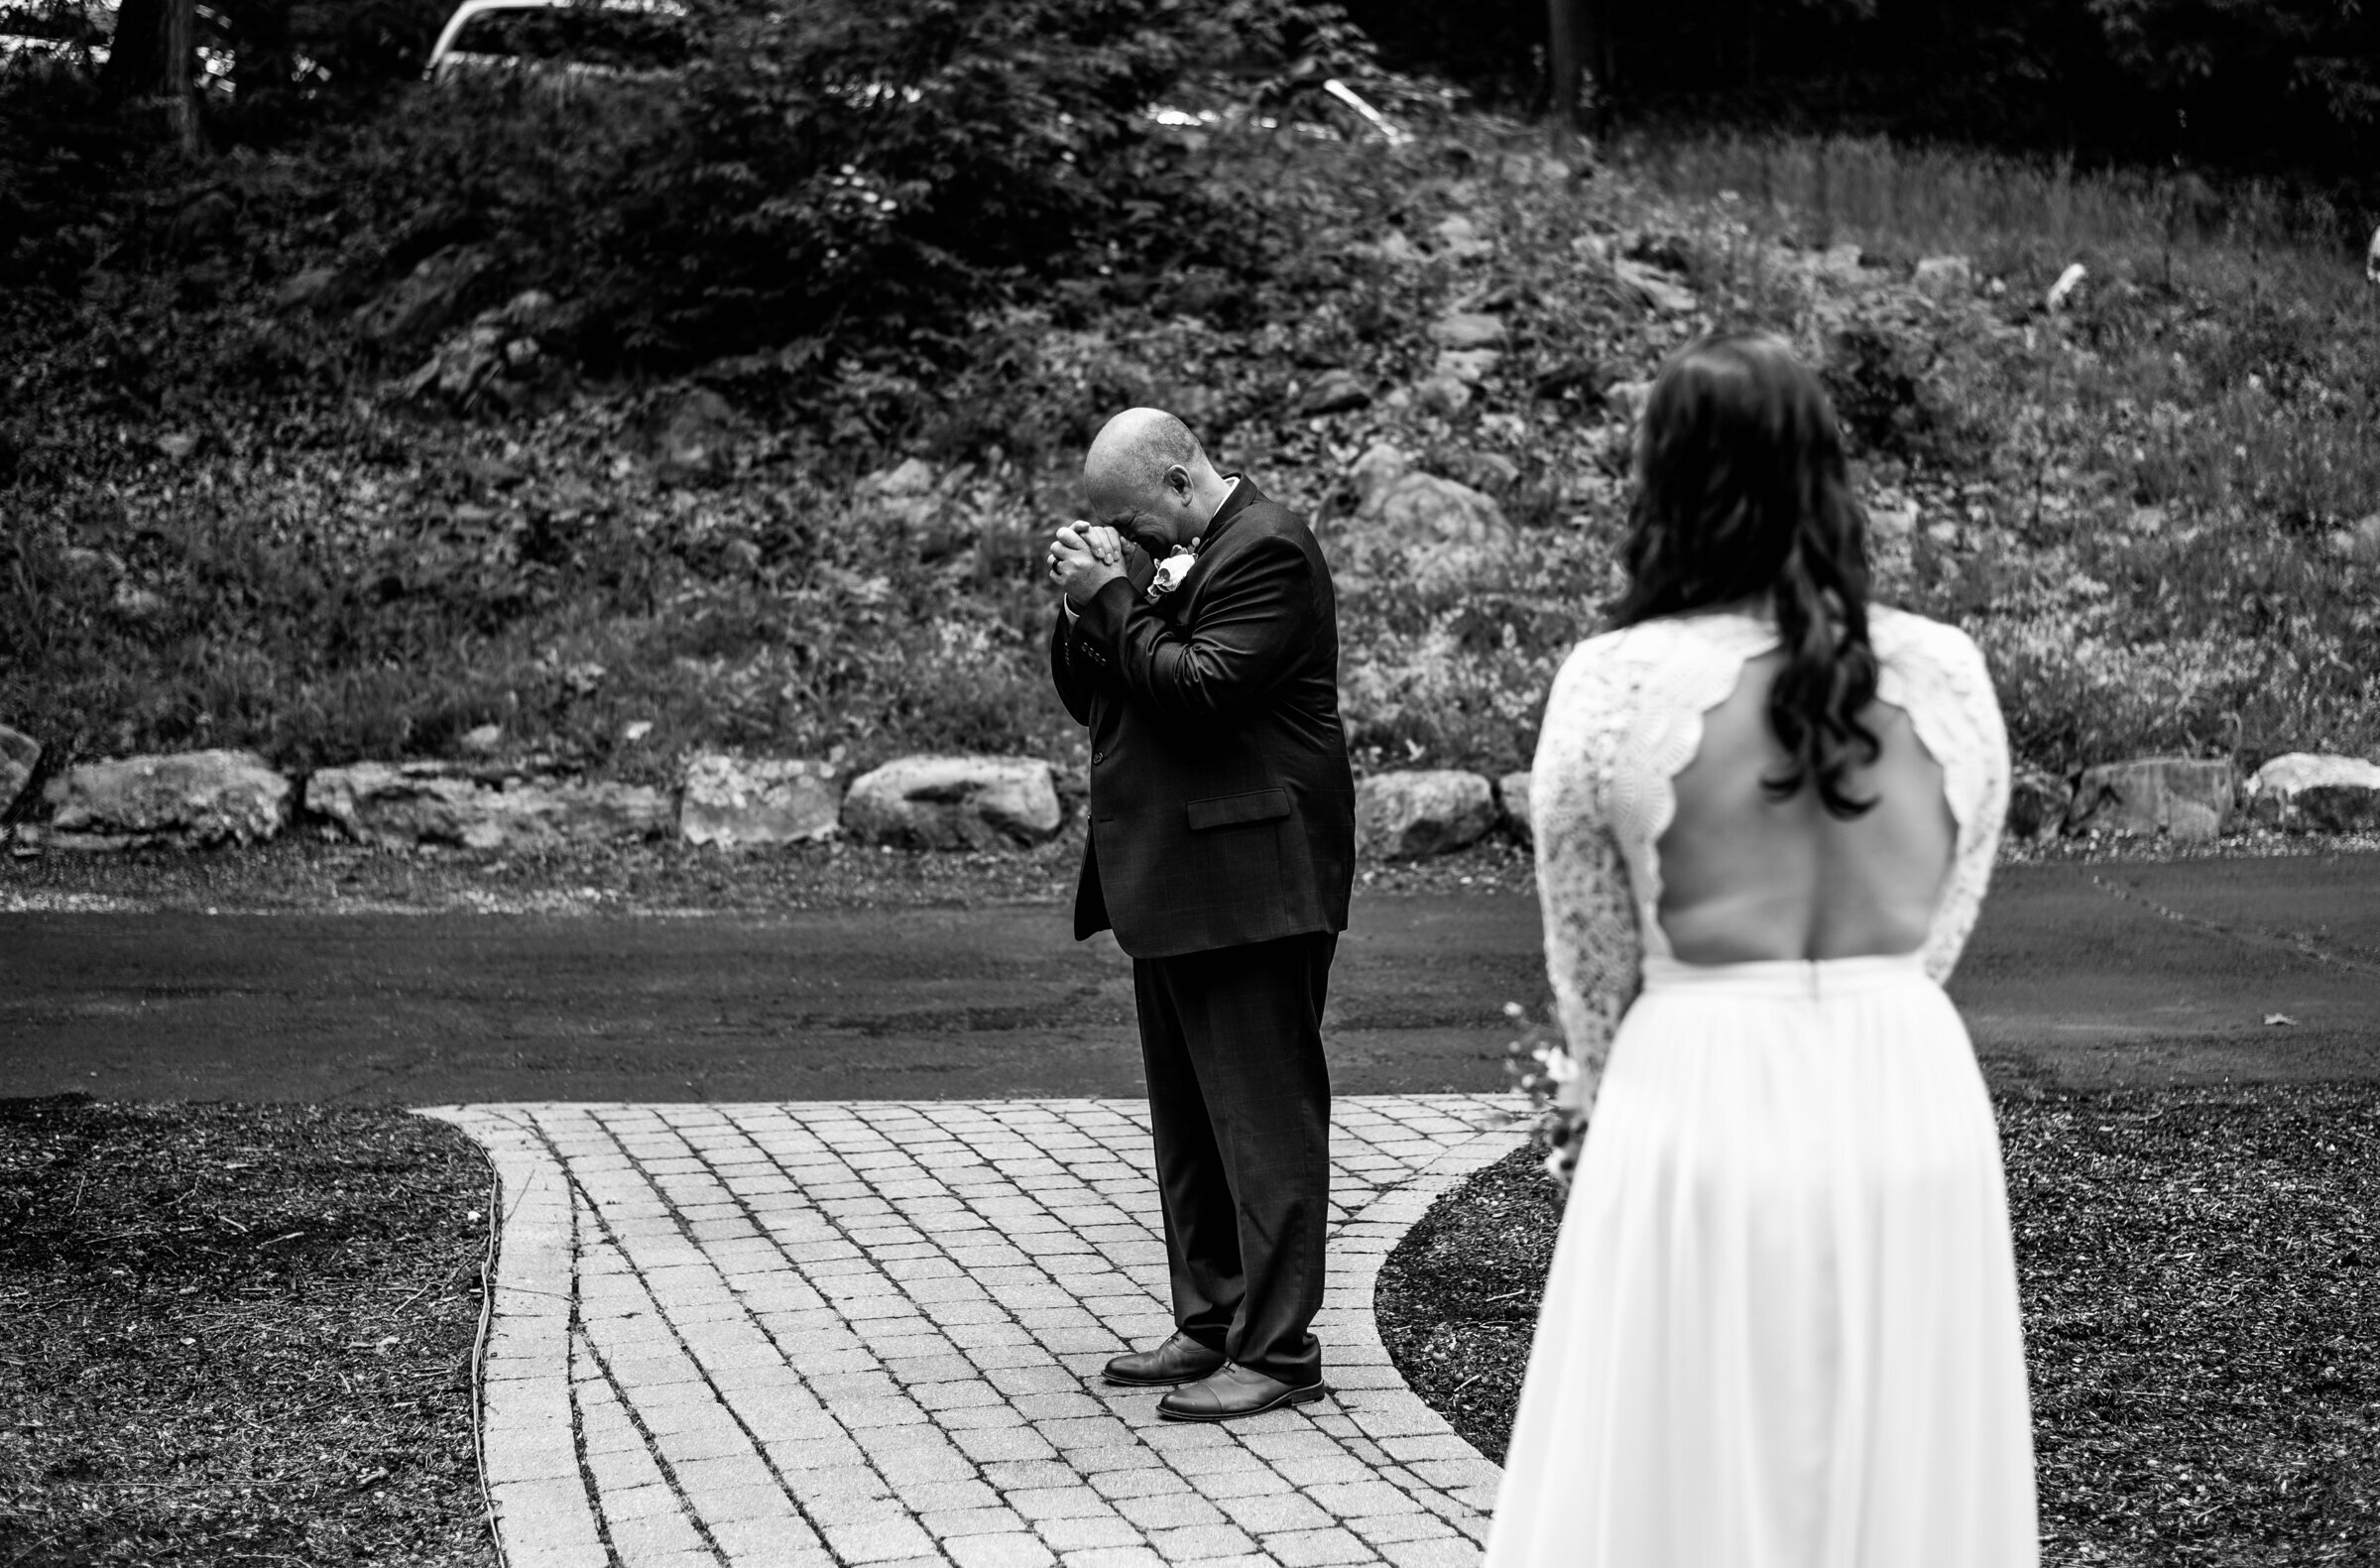 father-of-the-bride-first-look-small-wedding-intimate-wedding-day-nj-elopement-photographer.jpg